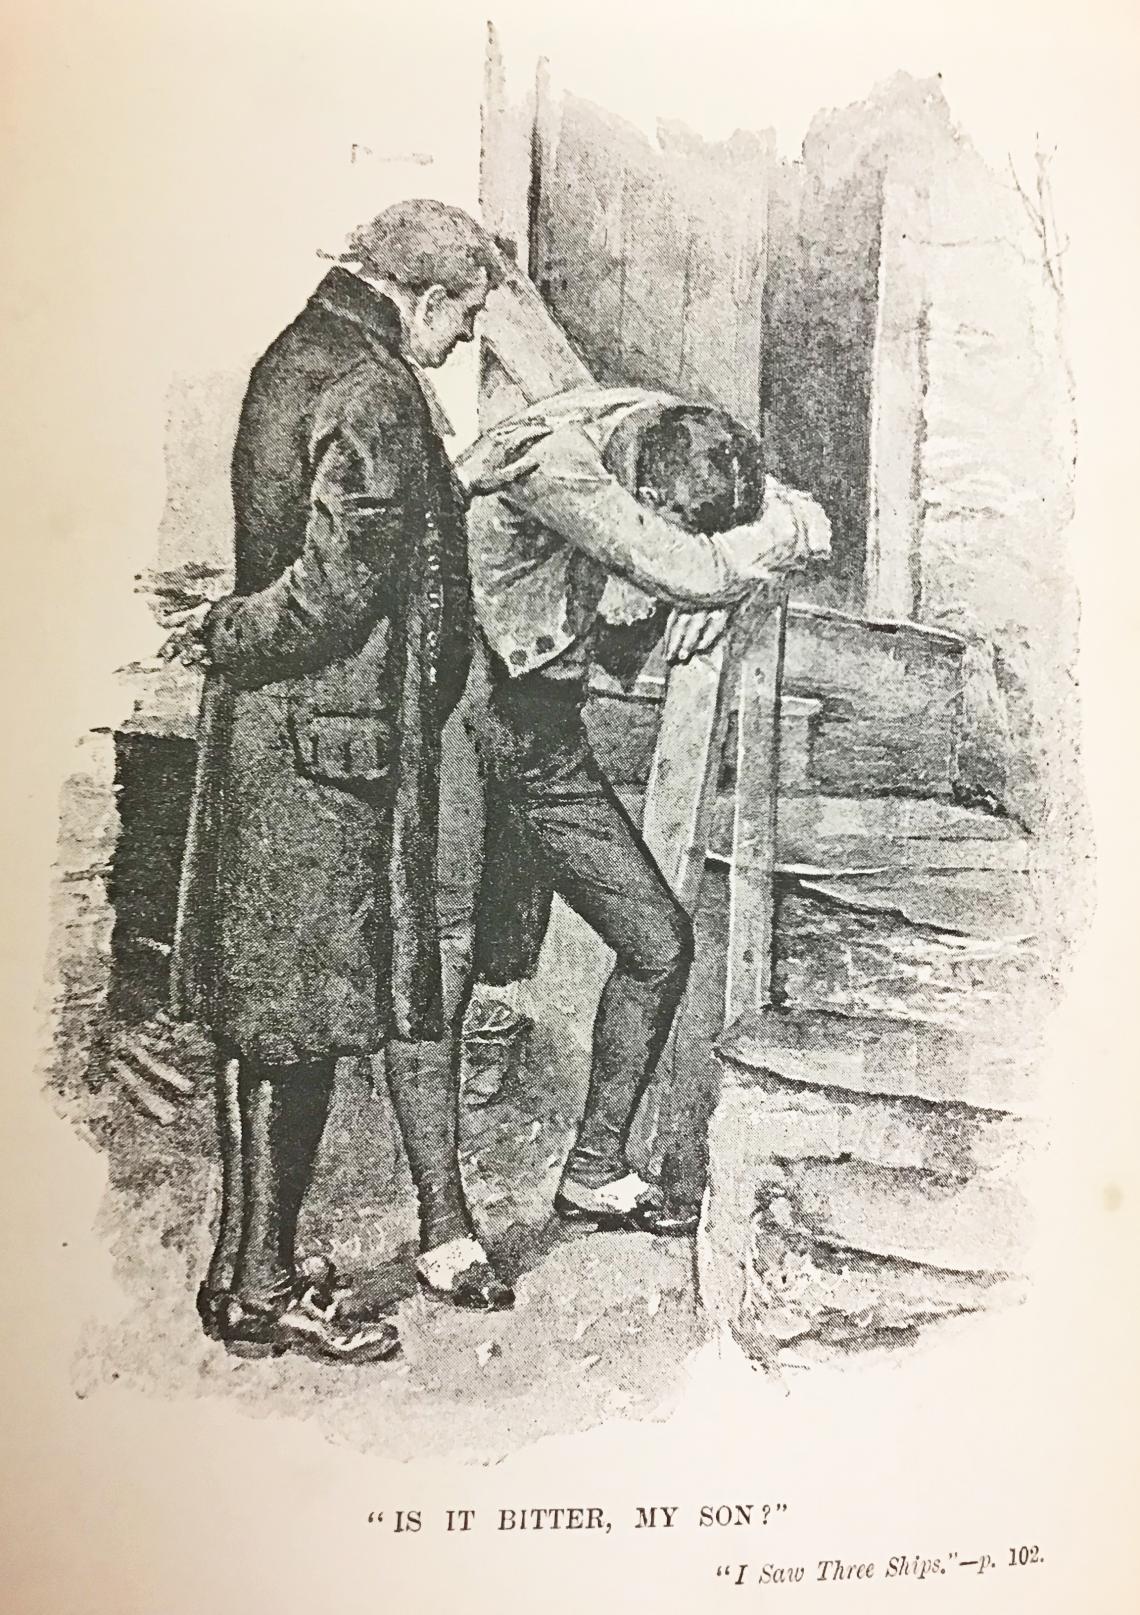 Illustration of an older man talking to a younger man who appears in distress